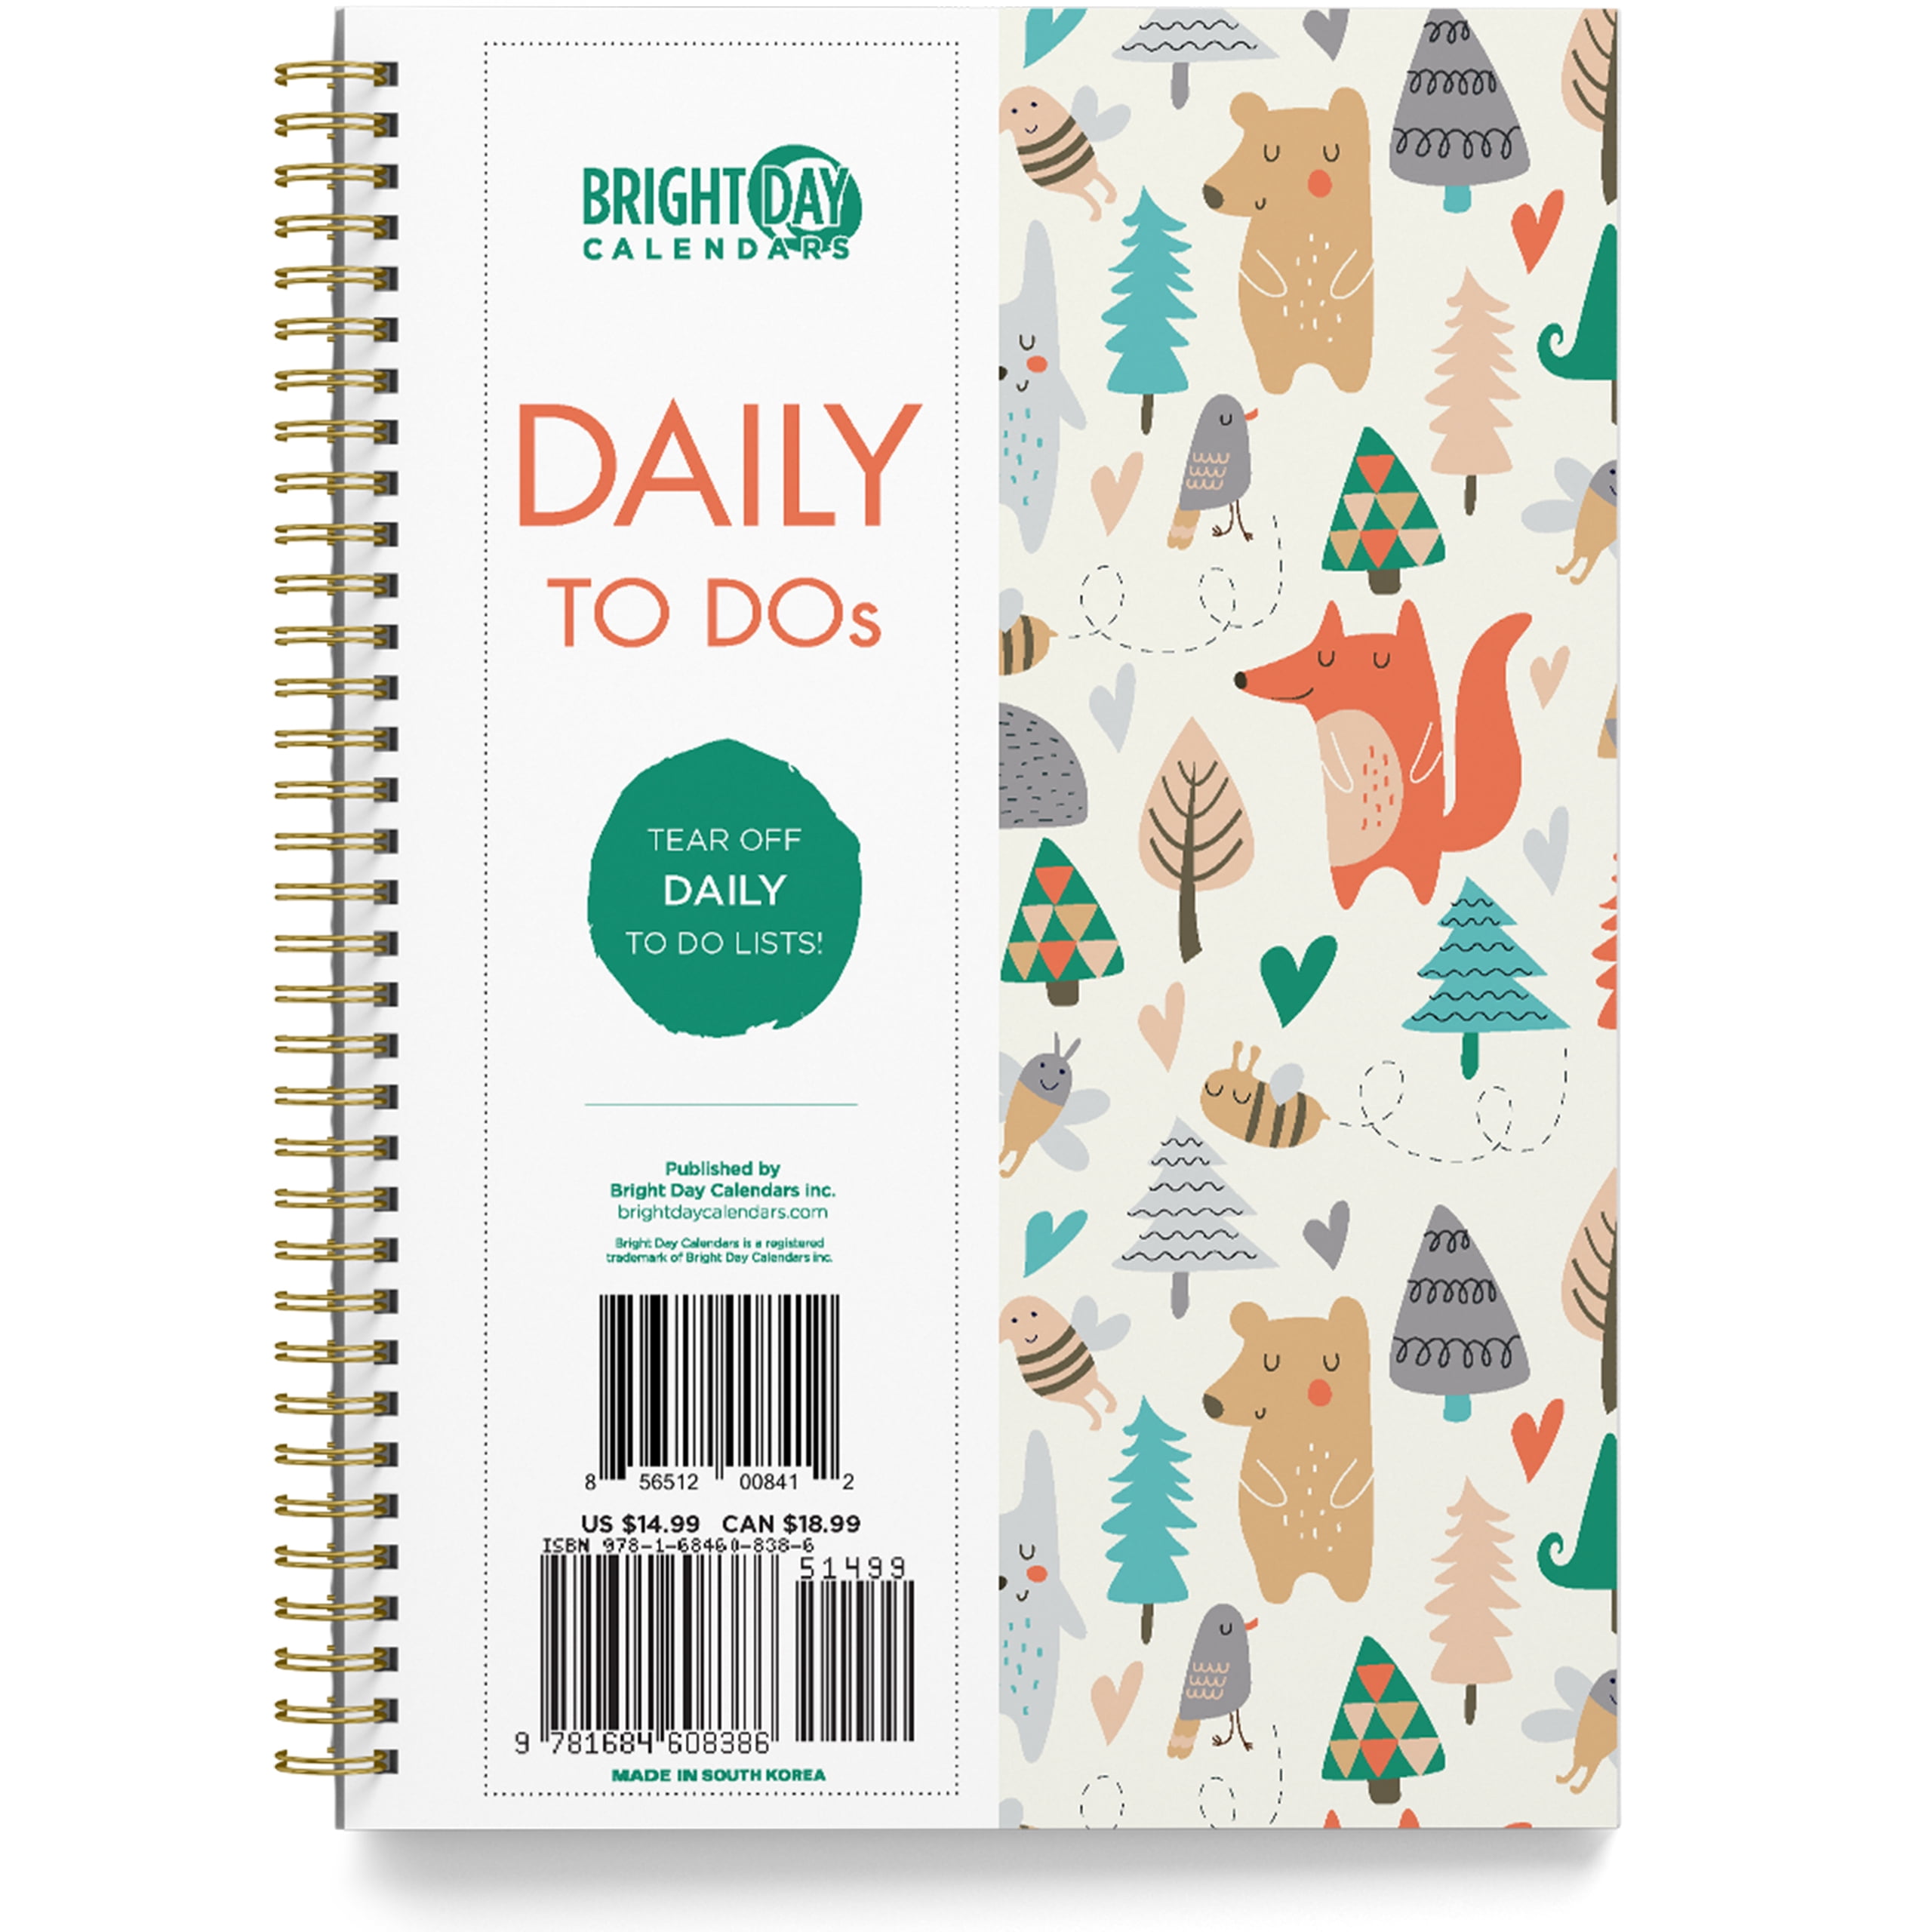 To Do List Daily Task Checklist Planner Time Management Notebook By